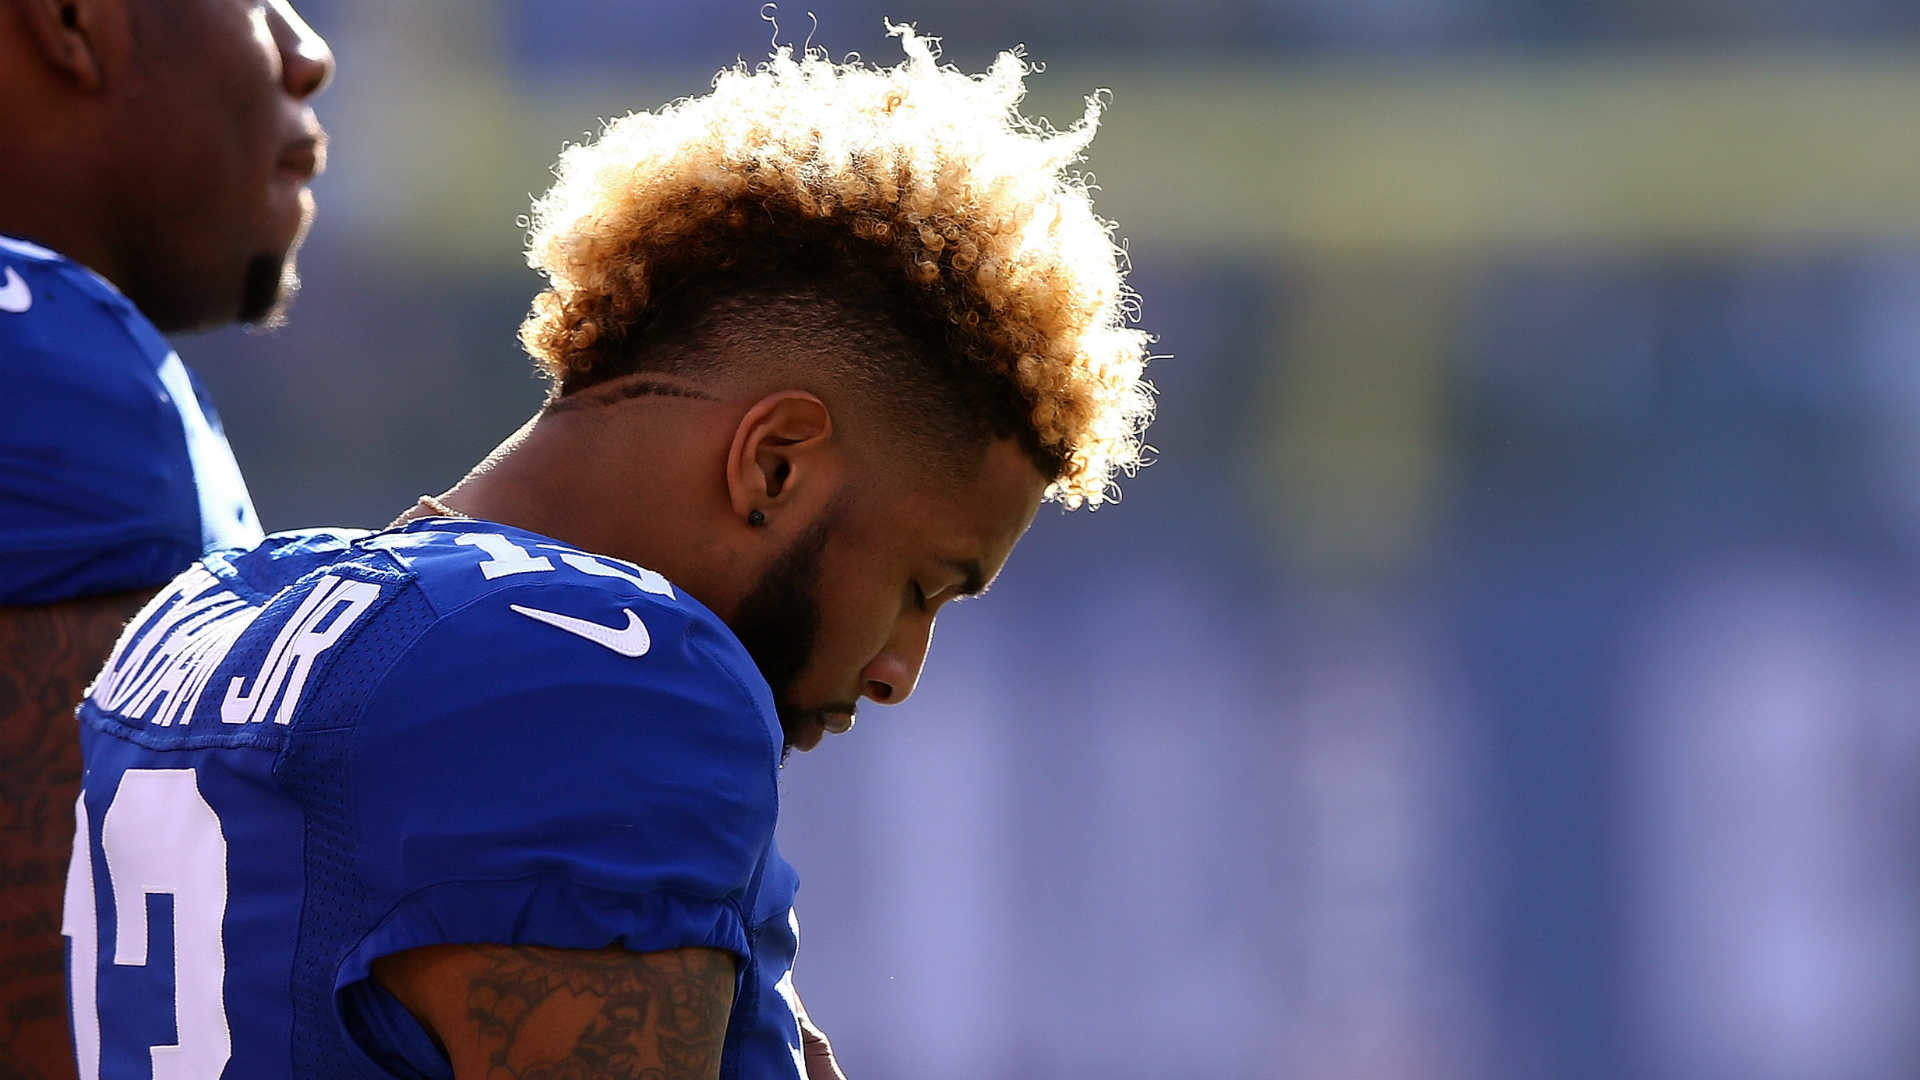 Odell Beckham'S Dirty Hit Can'T Be Excused, Deserved Stiffer Penalty